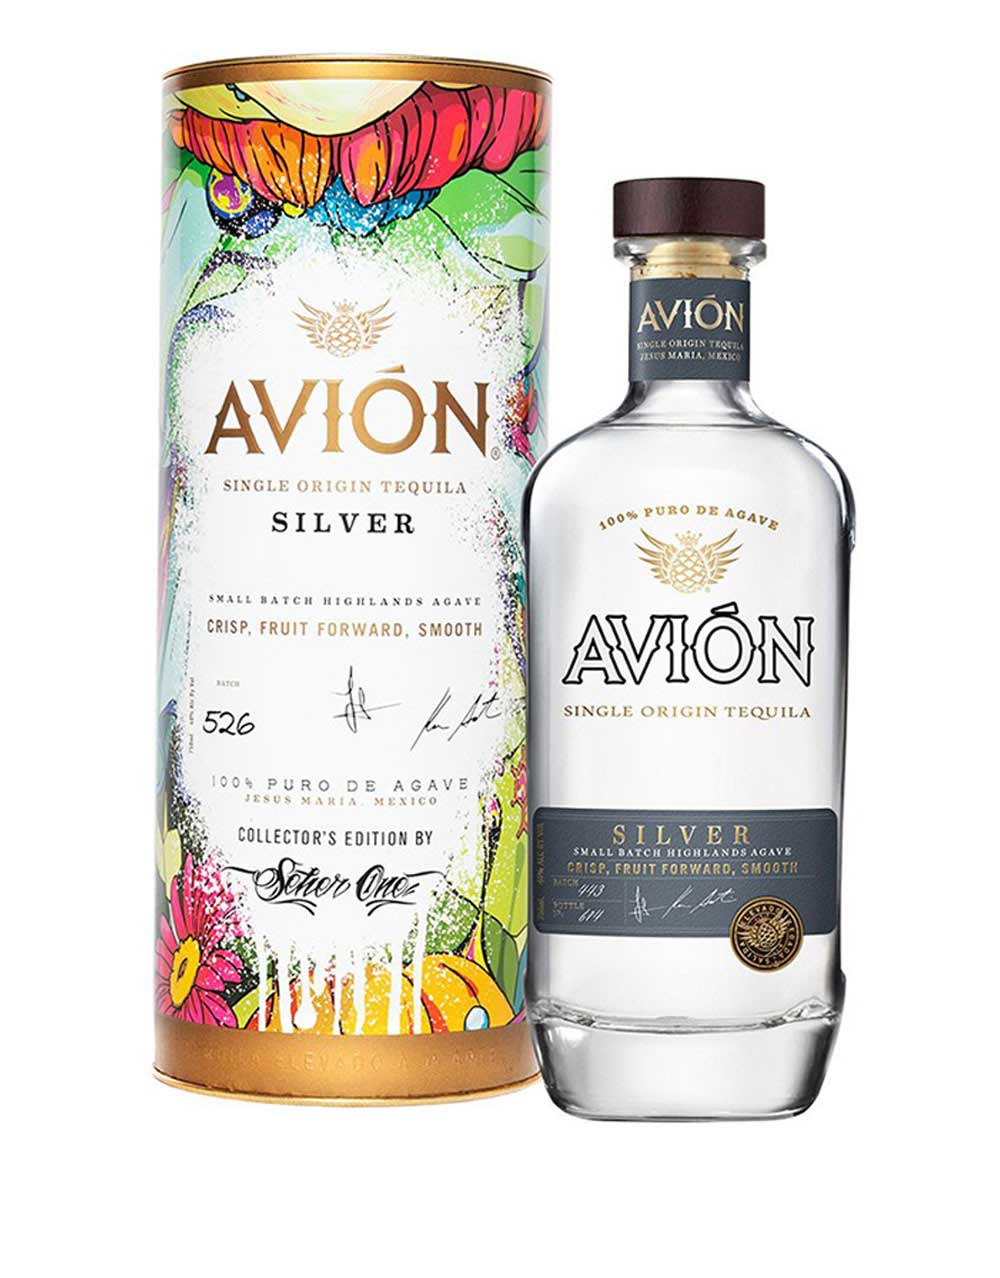 Avion Silver with Collector's Edition Canister